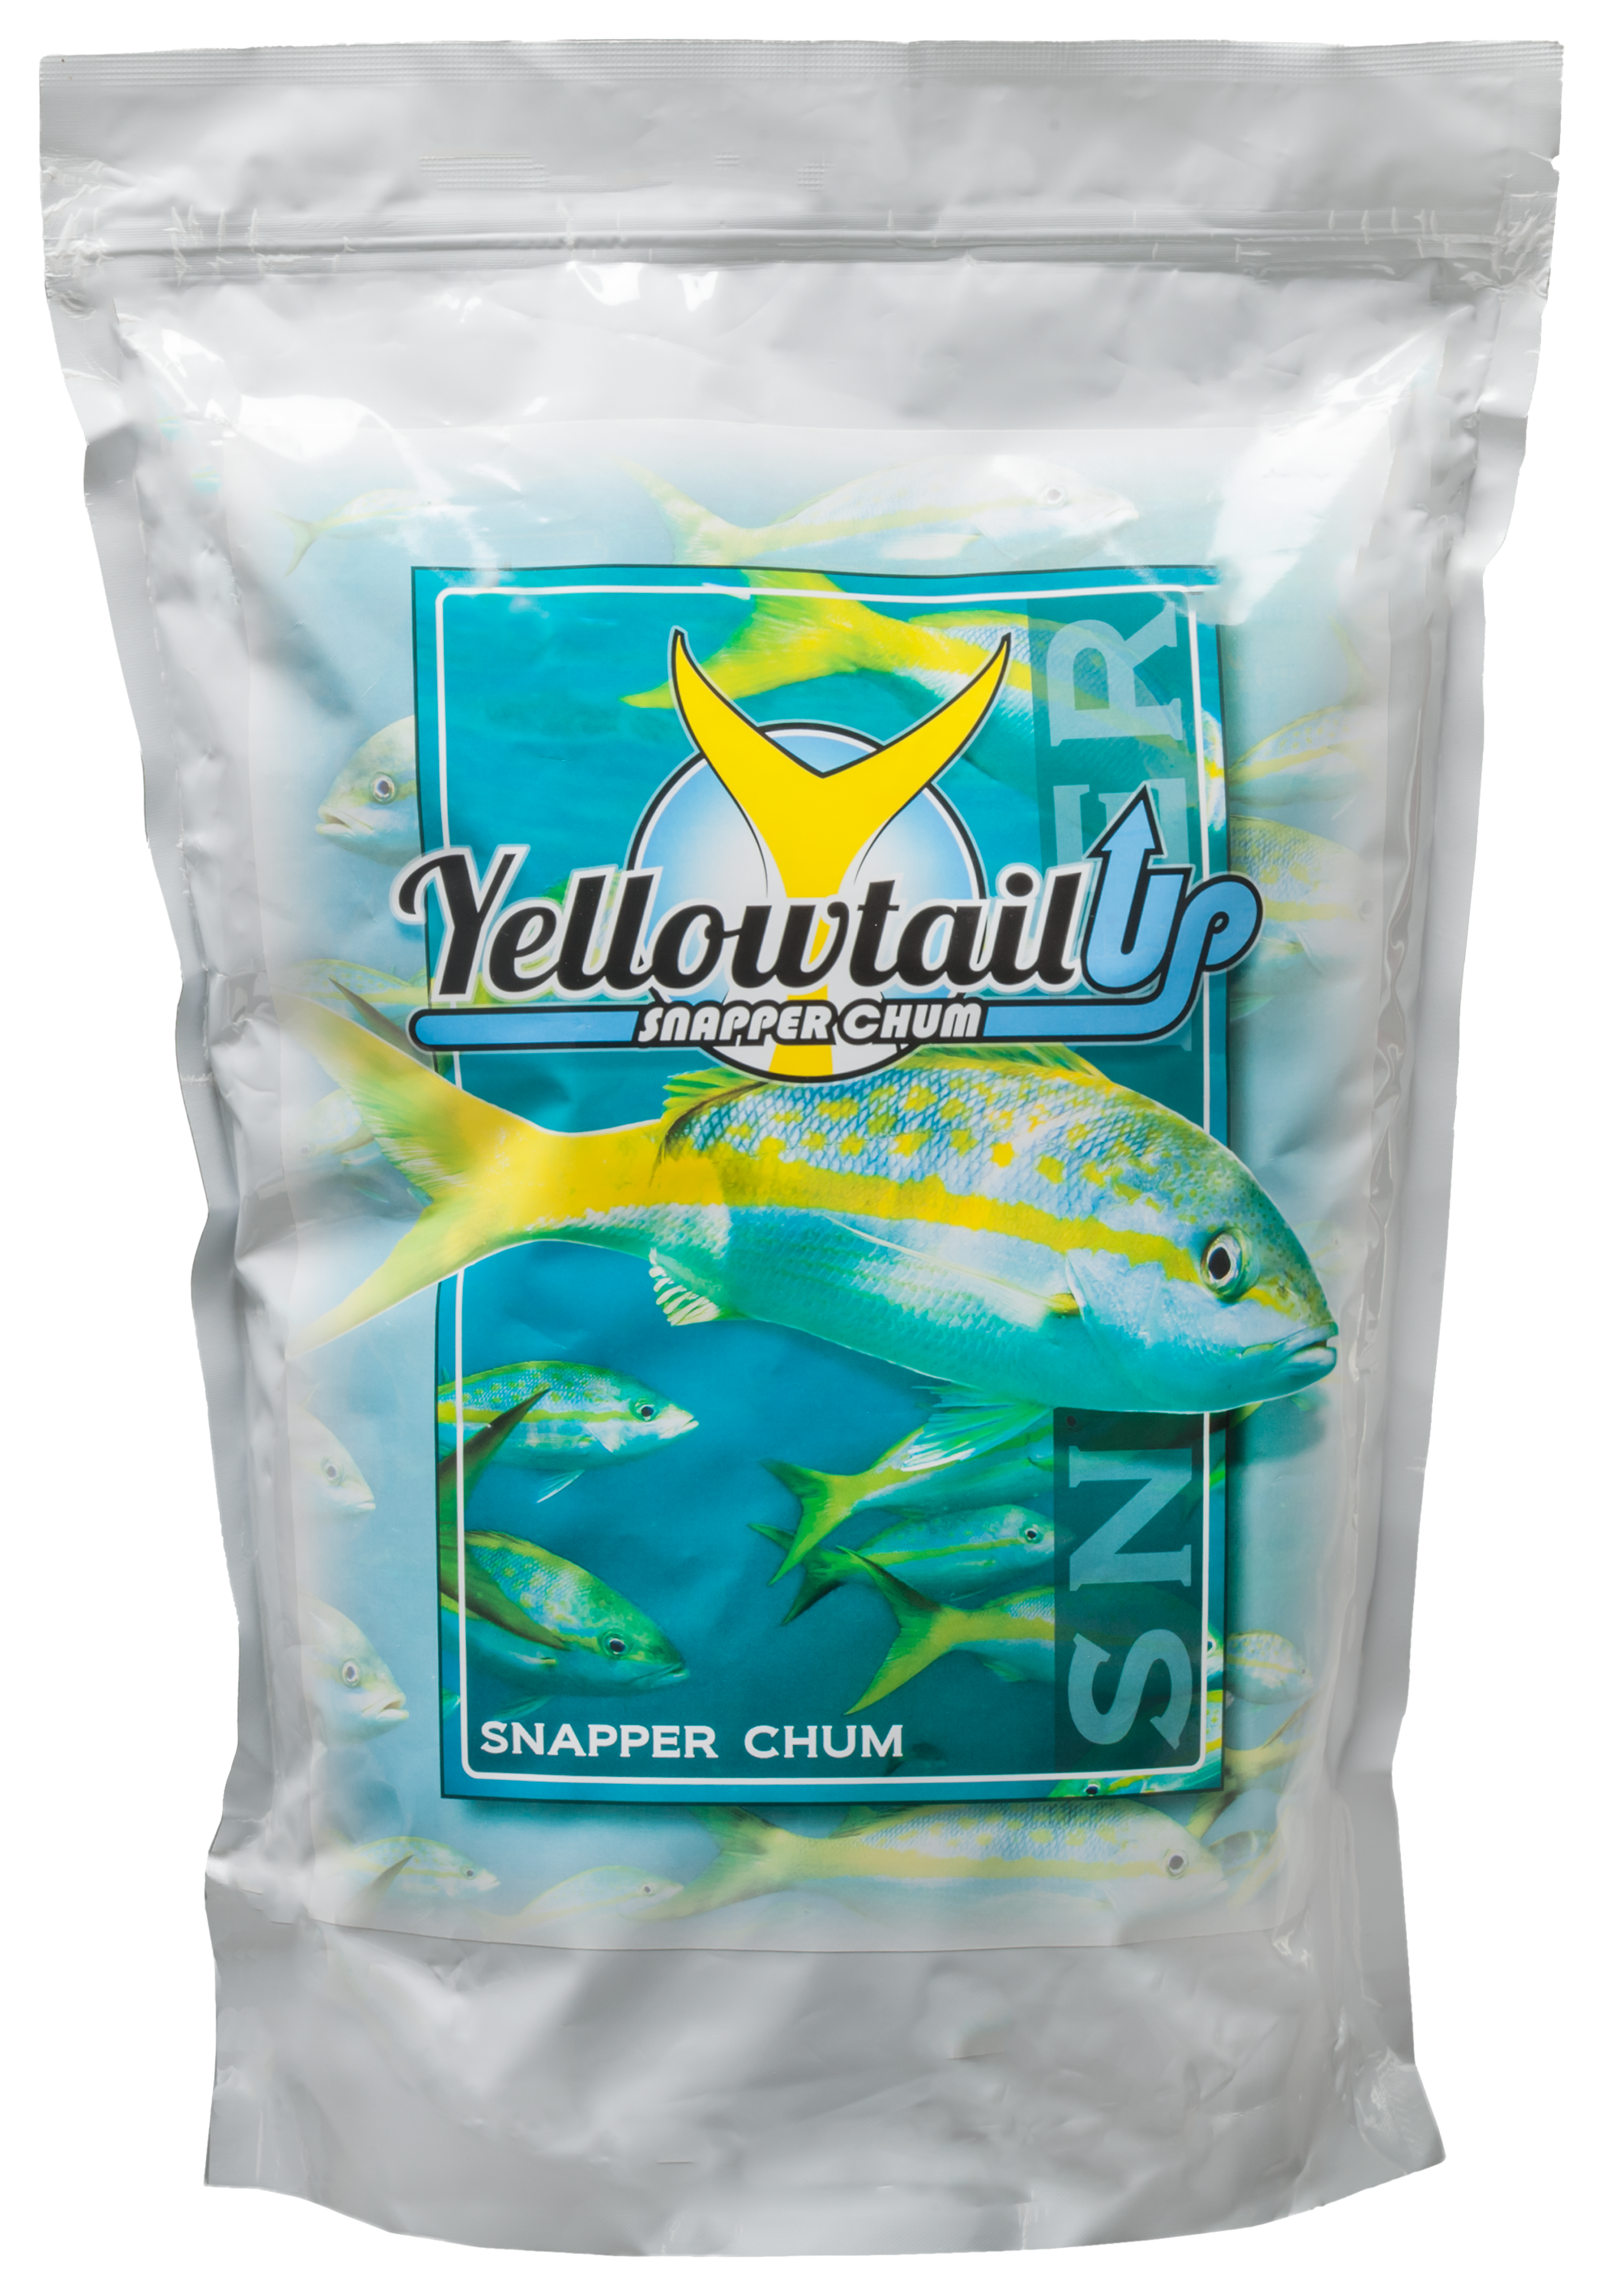 Yellowtail Snapper Chum Yellowtail Snapper Chum Catches fish! [Yellowtail  Snapper Chum] - $21.99 : Aquatic Nutrition, Quality Aquatic Diets and  Fishing Products by Fish Experts